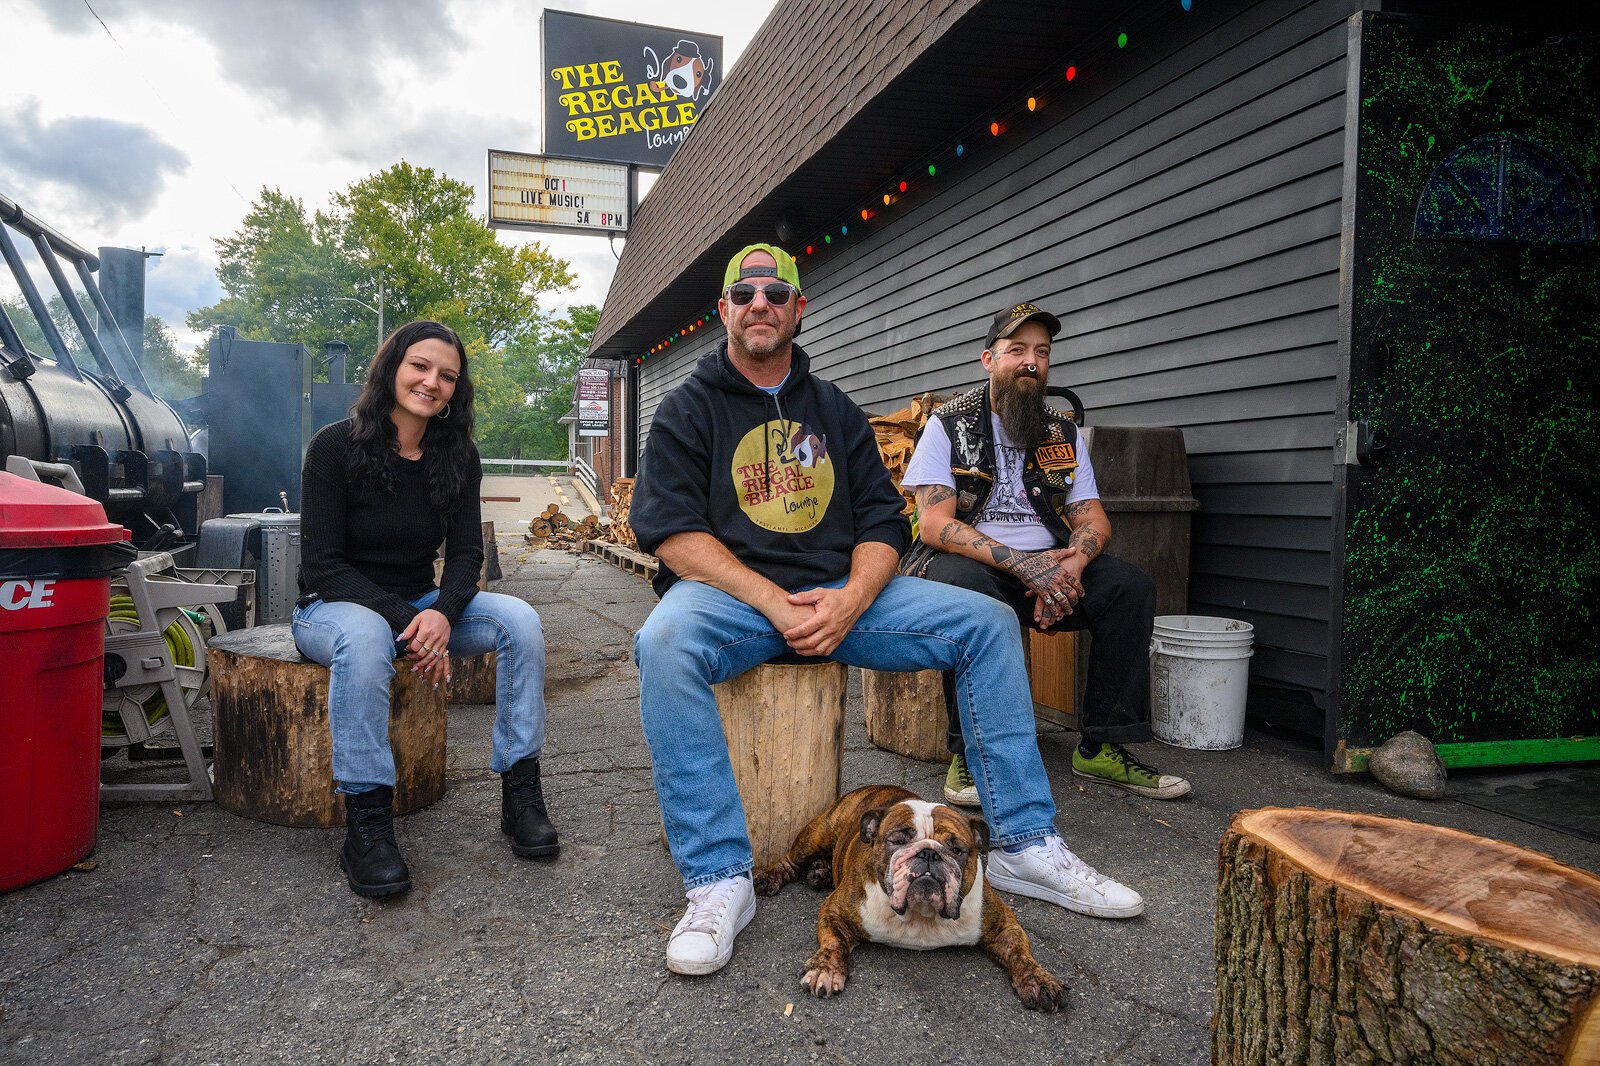 Heather List, Matteo Melosi, Kurt Prowell, and Zeus the dog at The Regal Beagle.